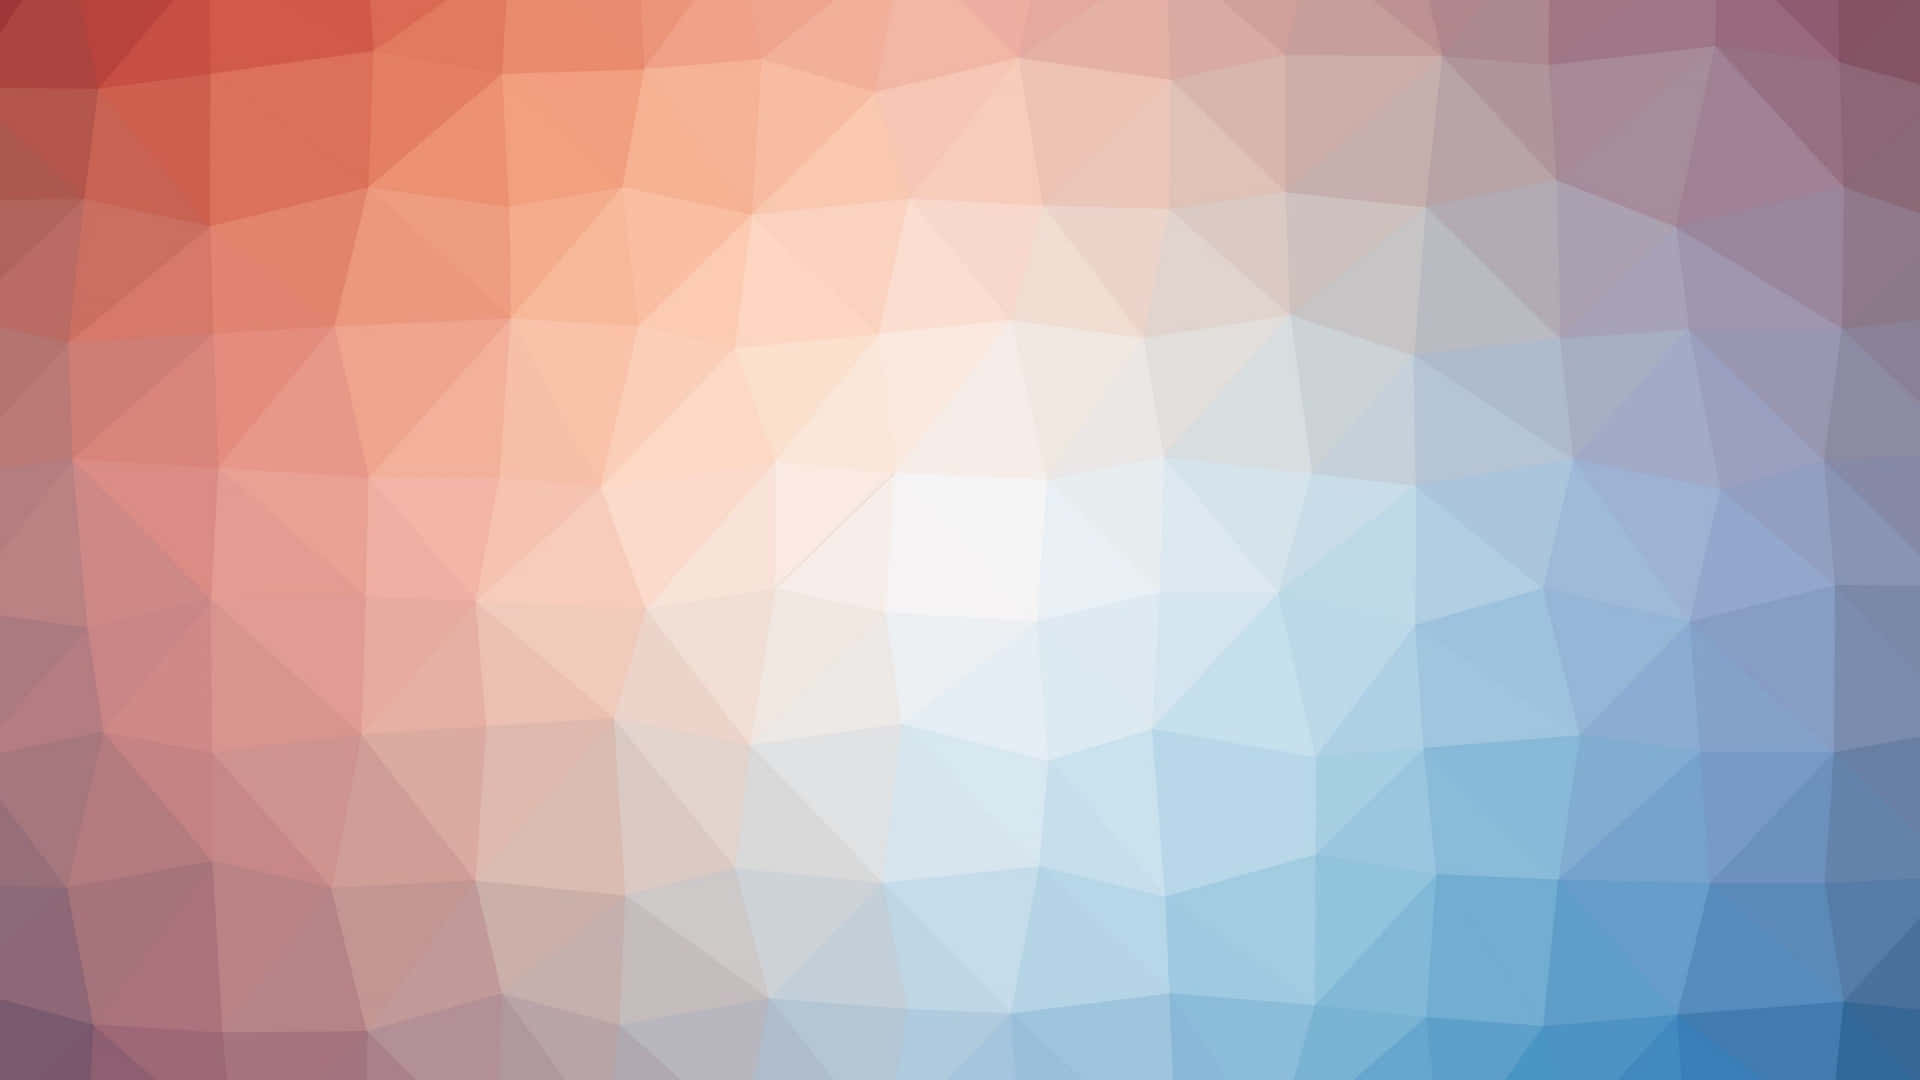 Get creative with this mesmerizing Polygon Background